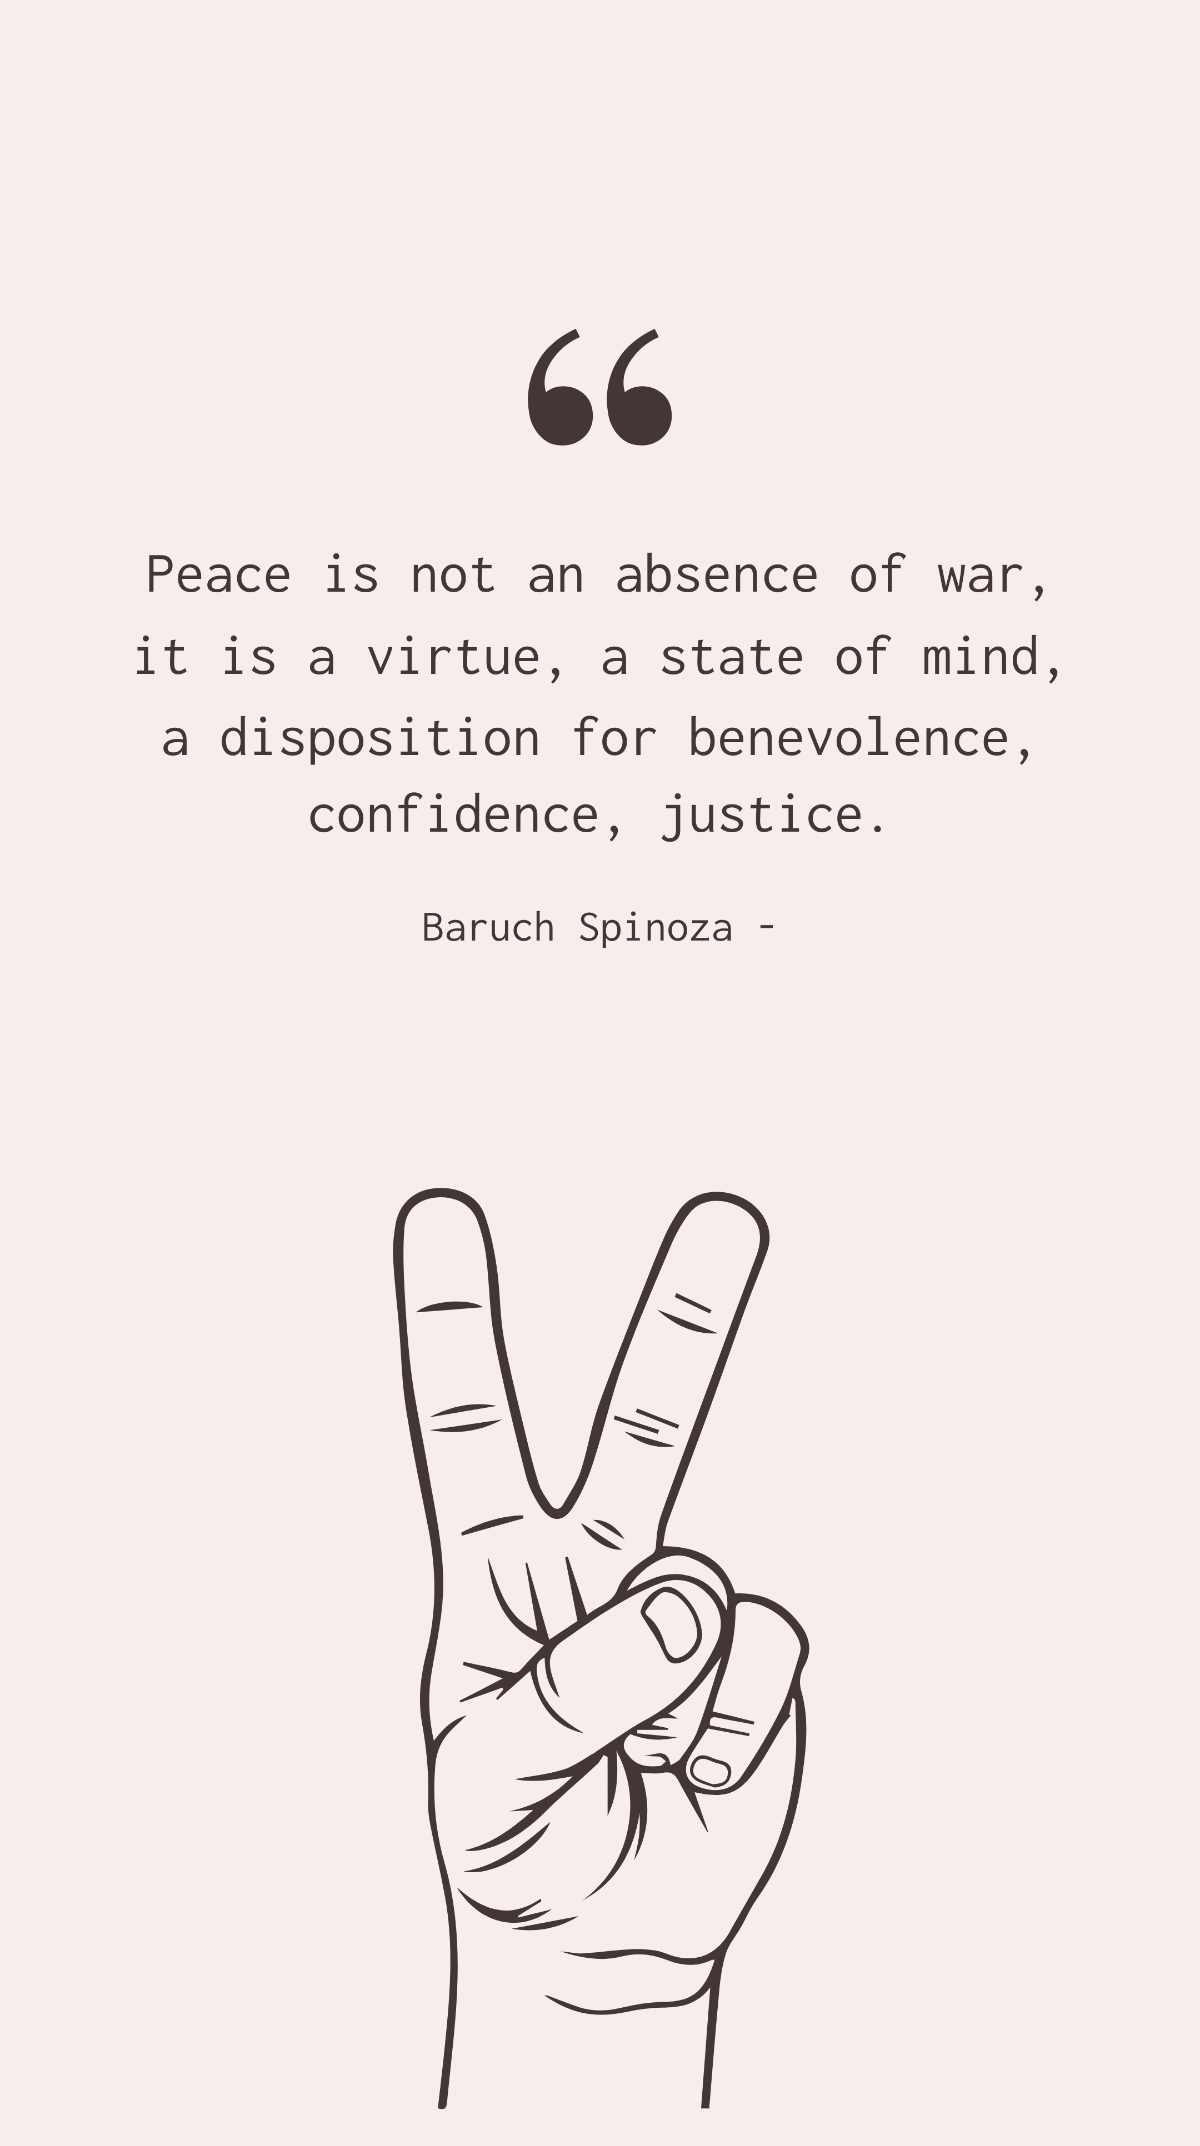 Baruch Spinoza - Peace is not an absence of war, it is a virtue, a state of mind, a disposition for benevolence, confidence, justice.